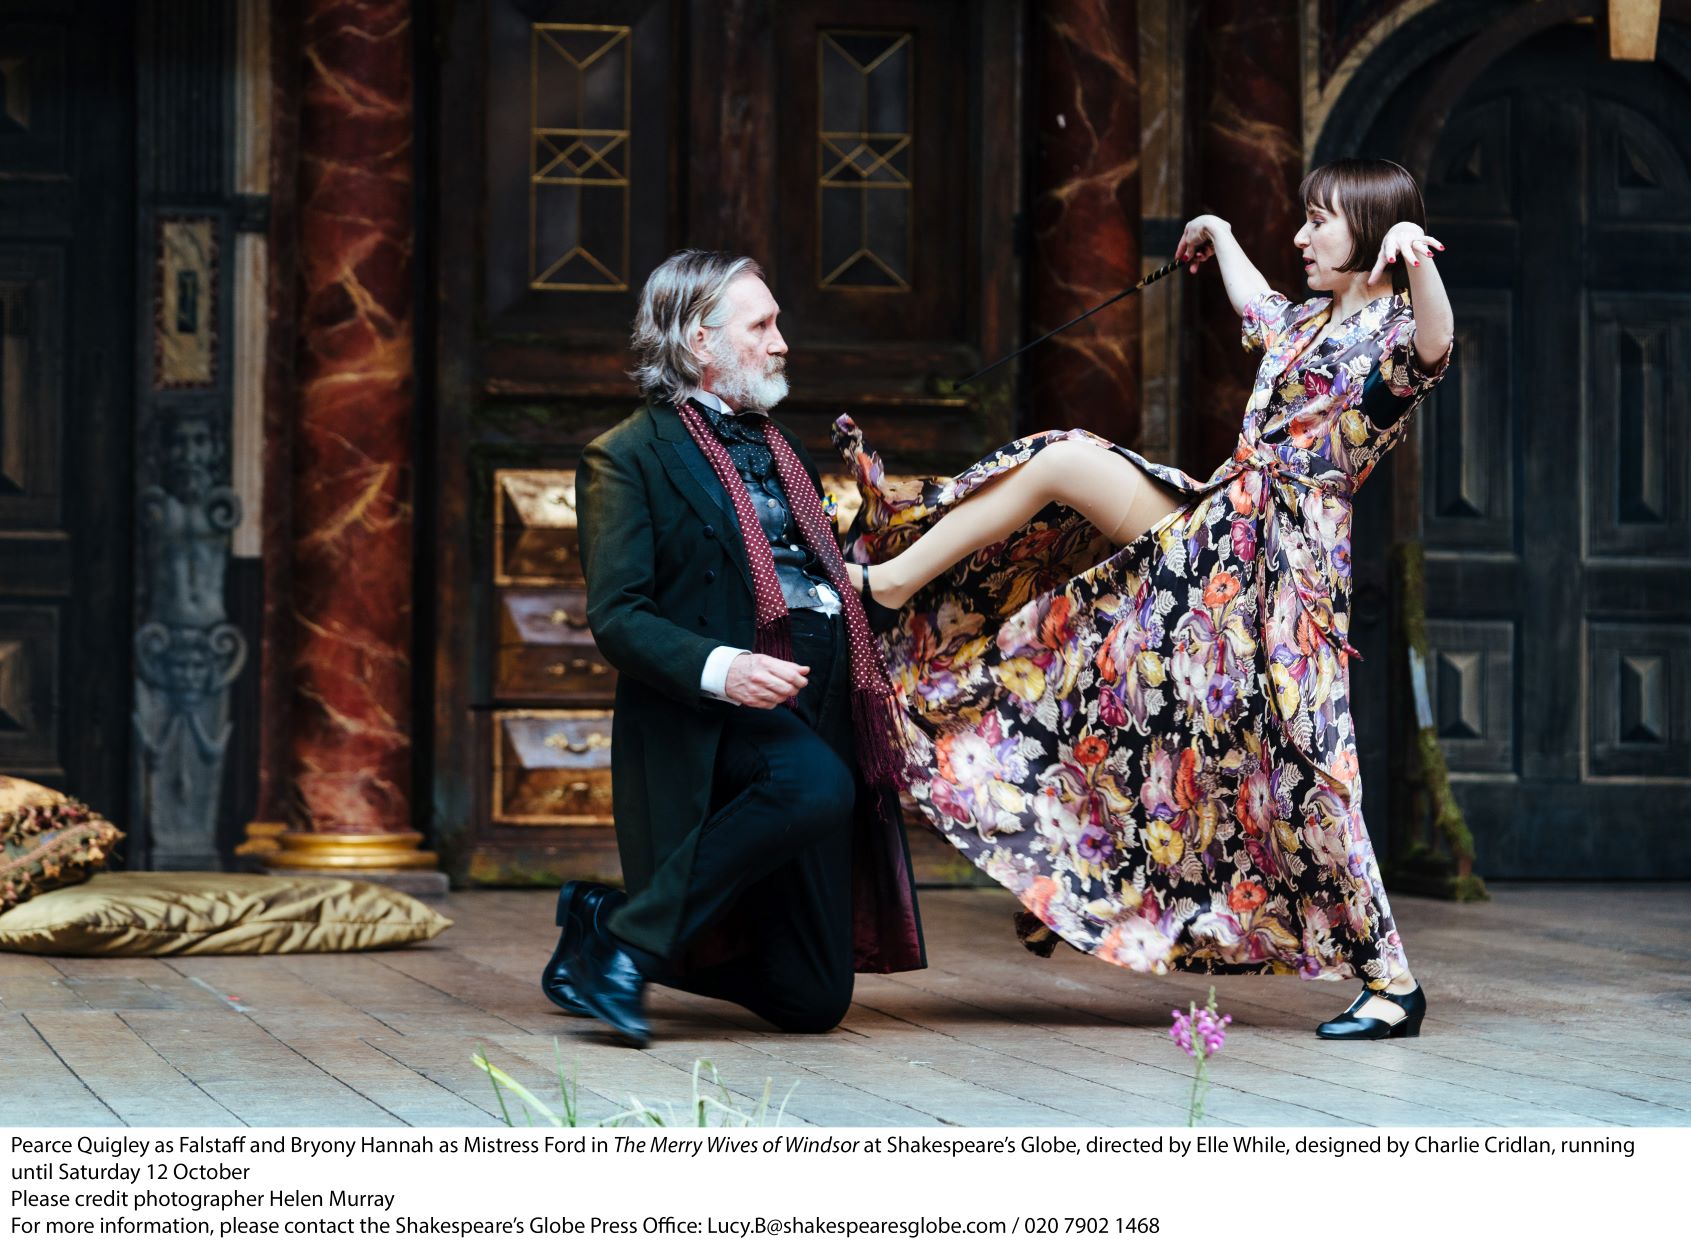 Merry Wives of Windsor-Bryony Hannah | Copyright: © Helen Murray